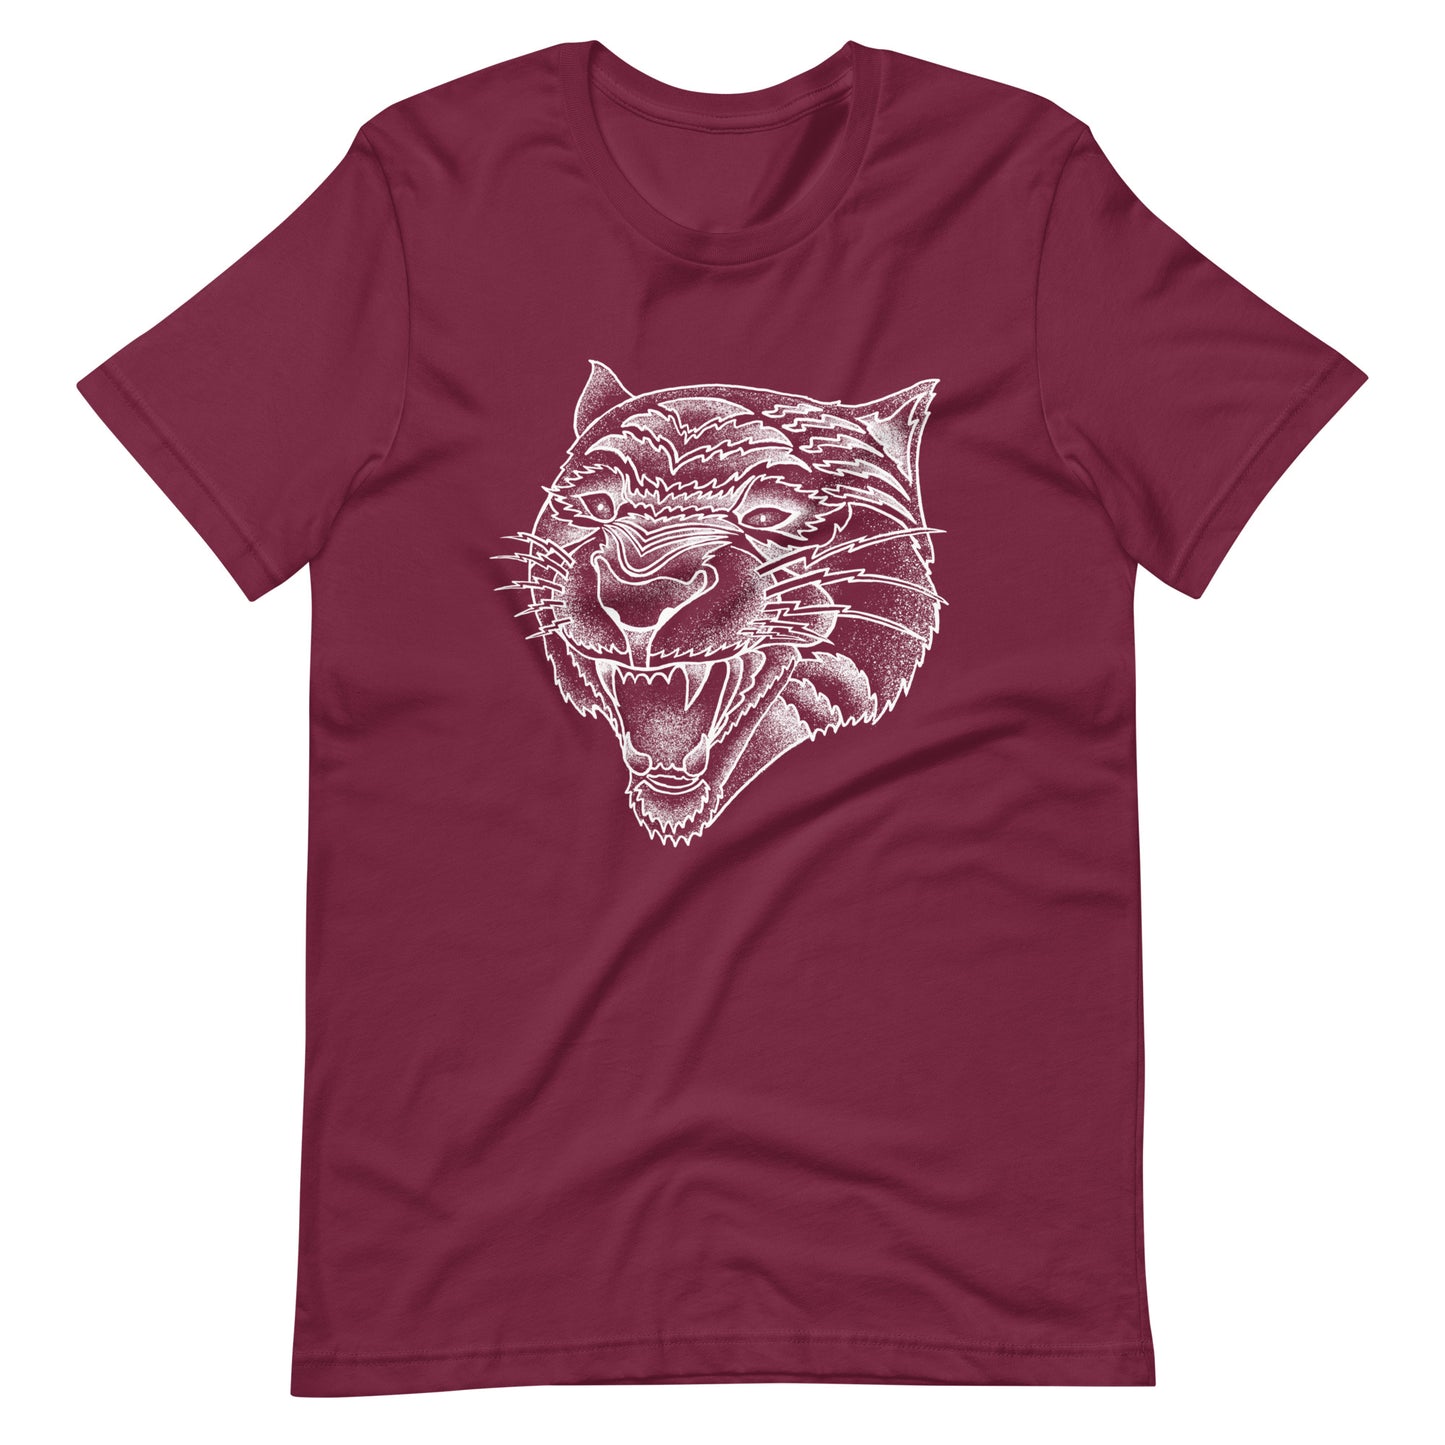 Panther White - Men's t-shirt - Maroon Front